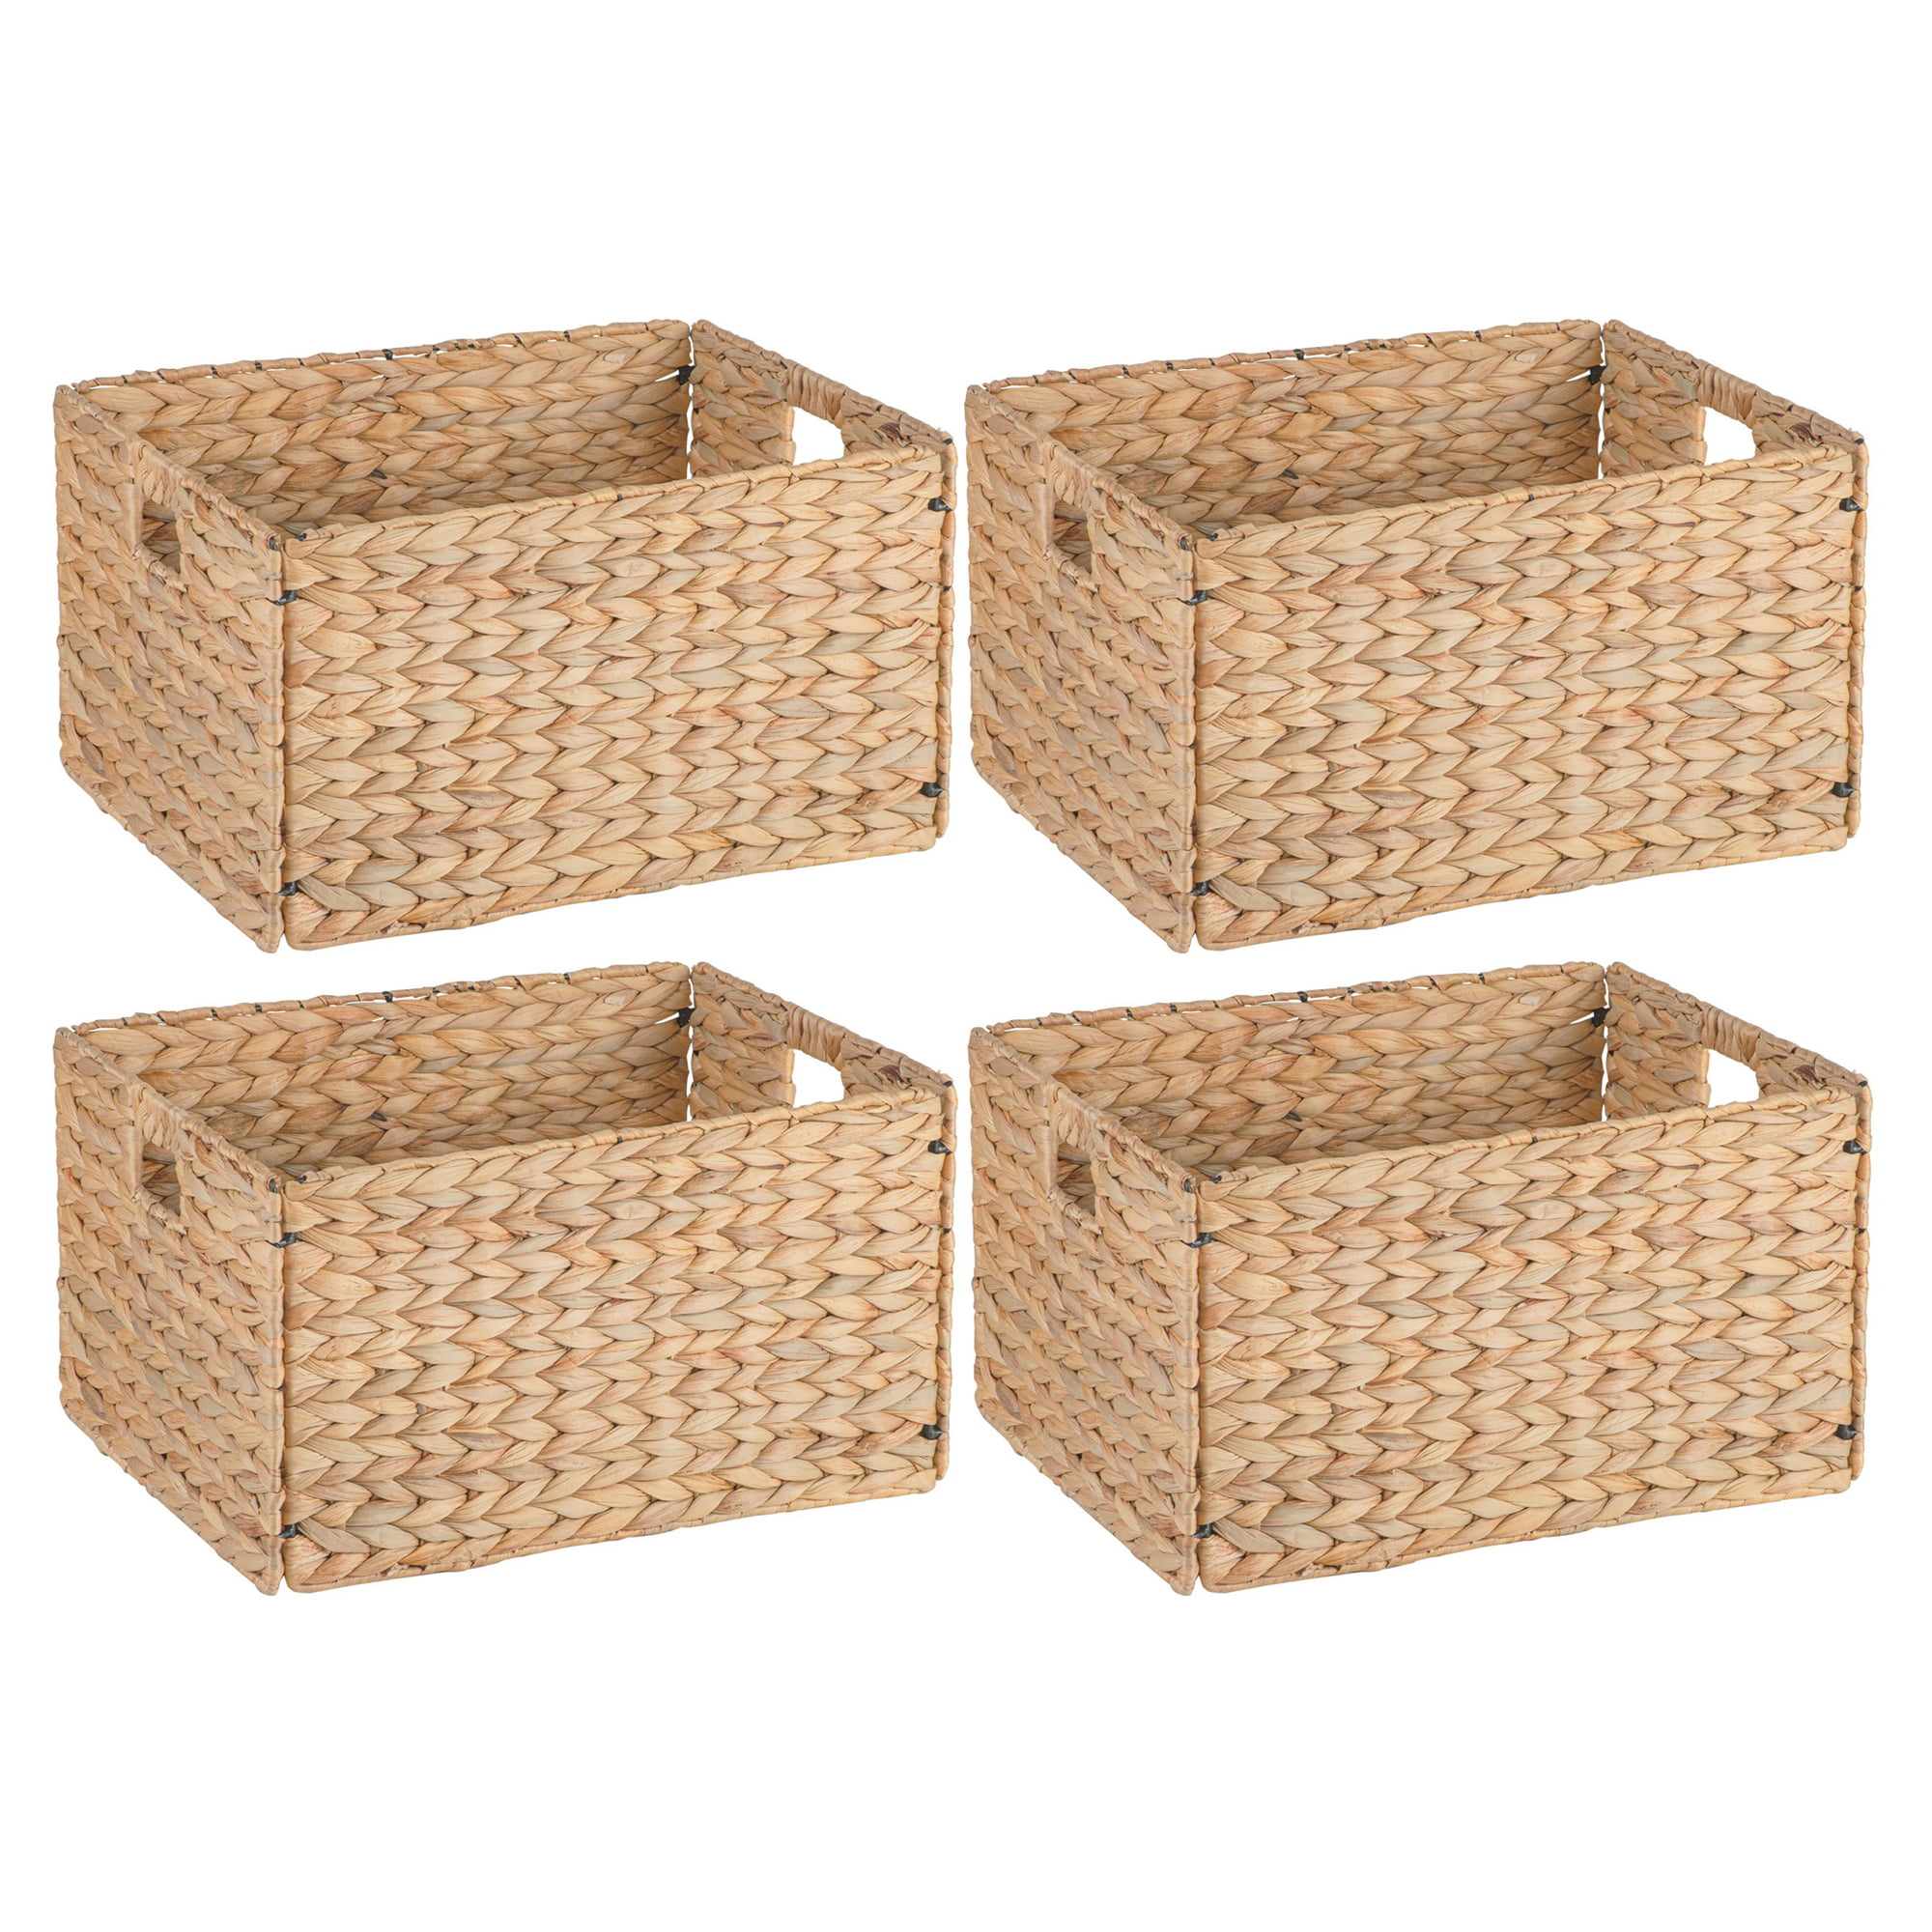 Natural Water Hyacinth Square Basket Gift Hamper Hand Woven 4 Sizes Available 